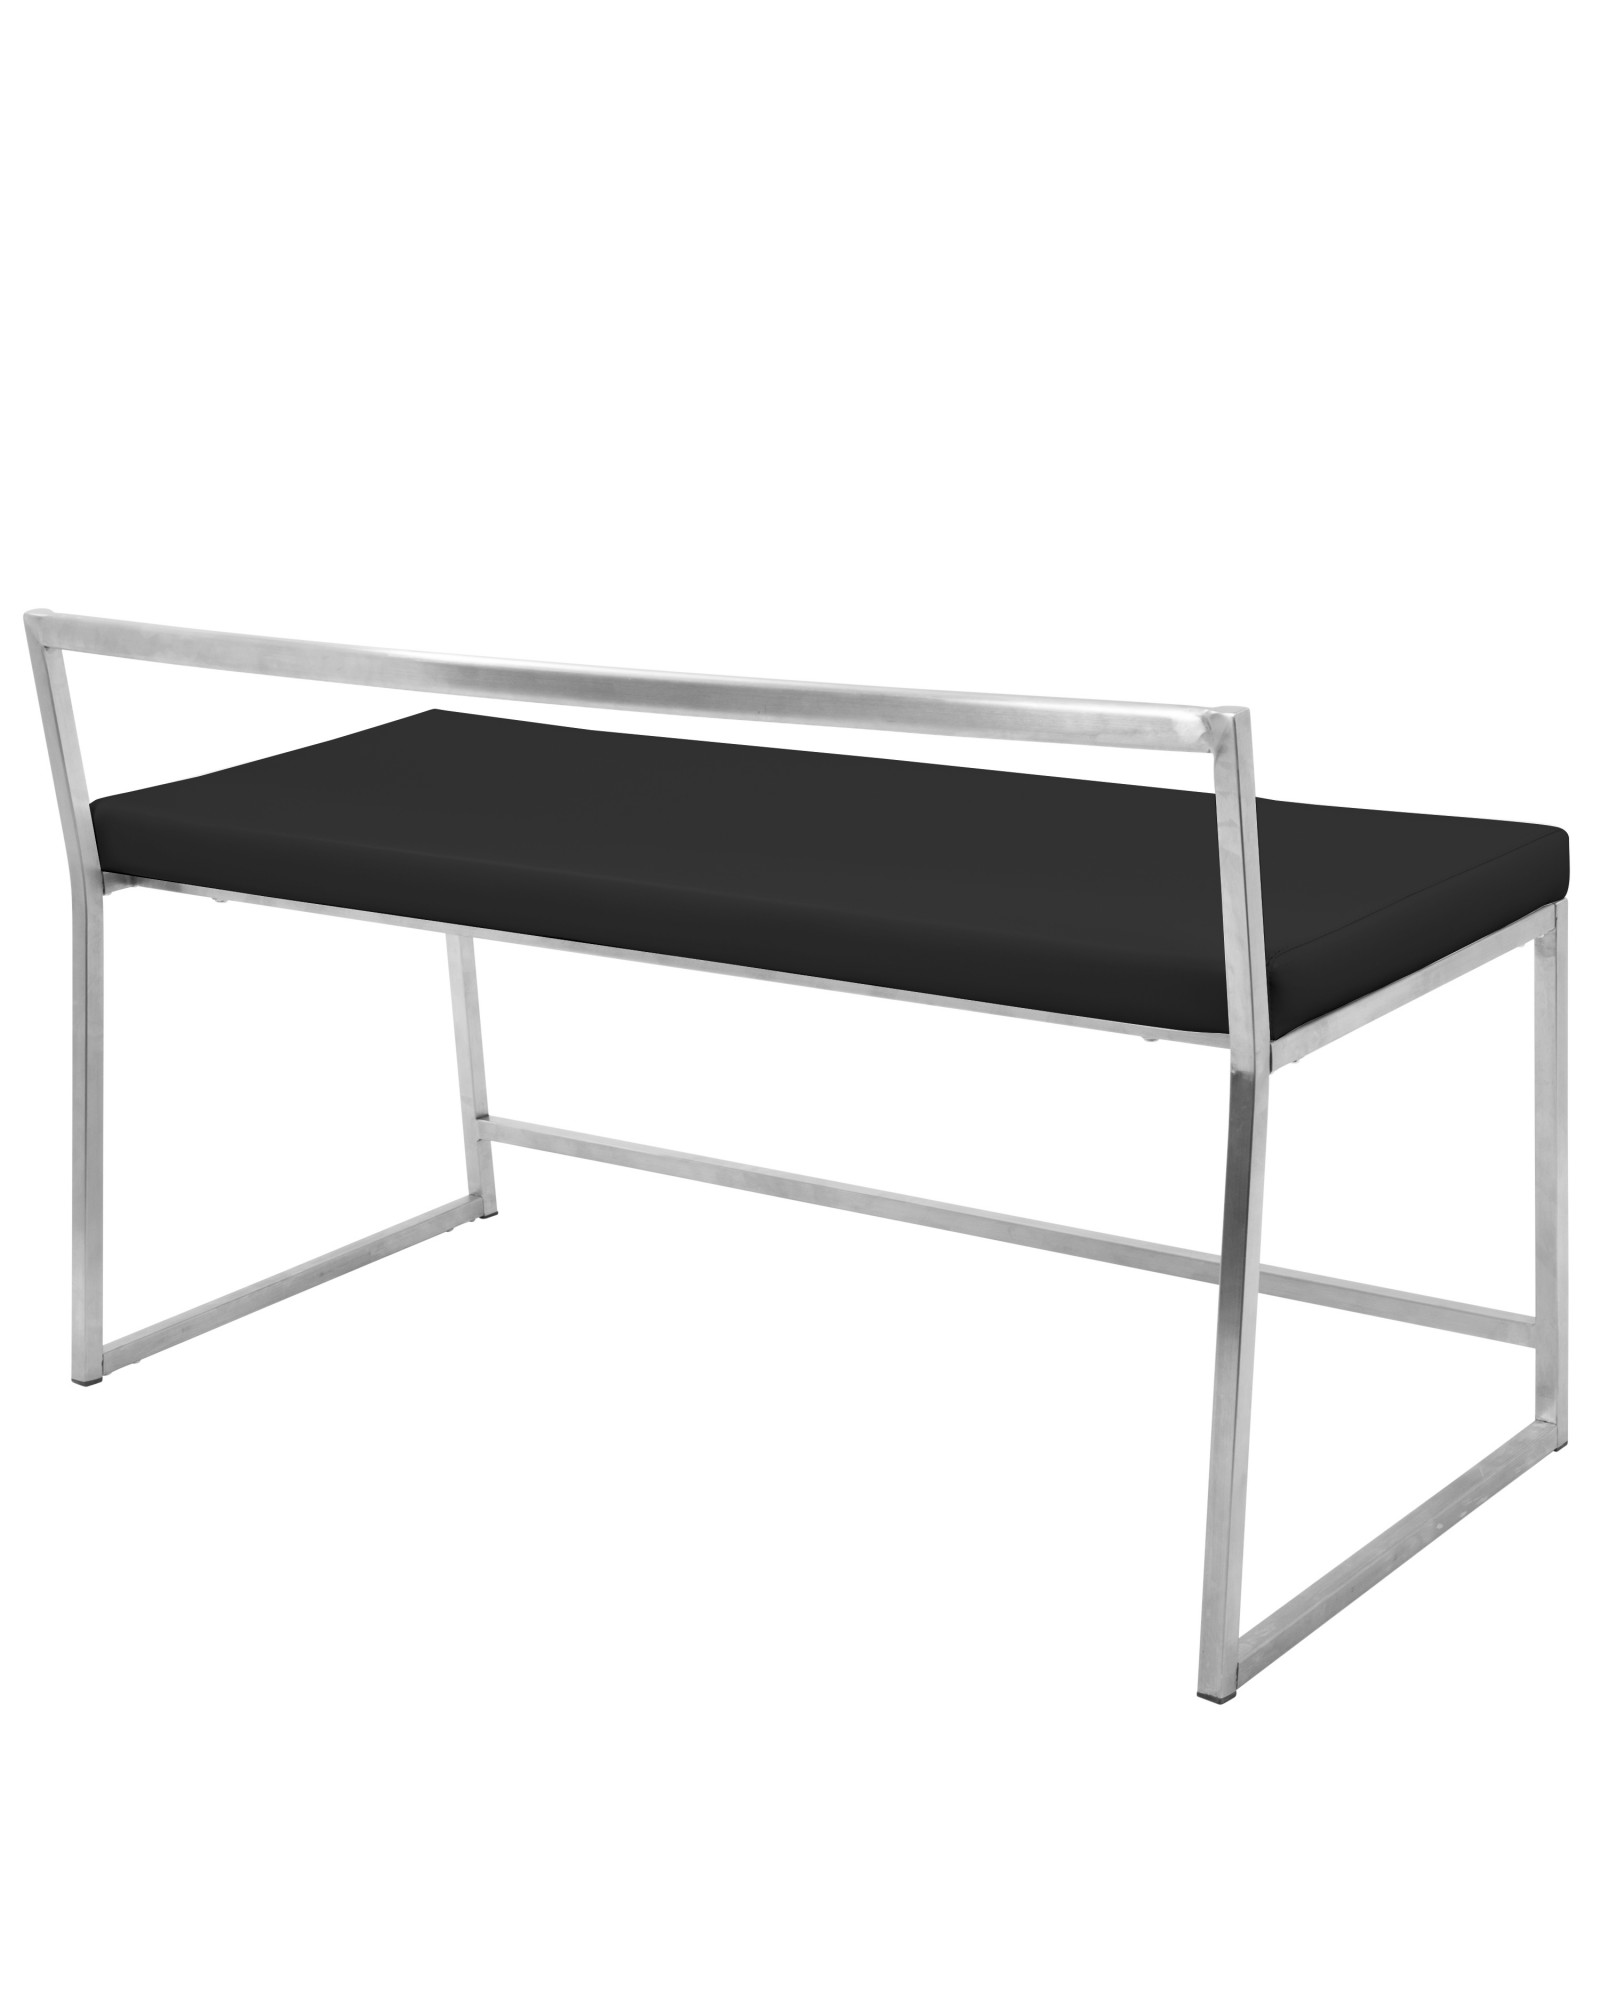 Fuji Contemporary Dining / Entryway Bench in Black Faux Leather